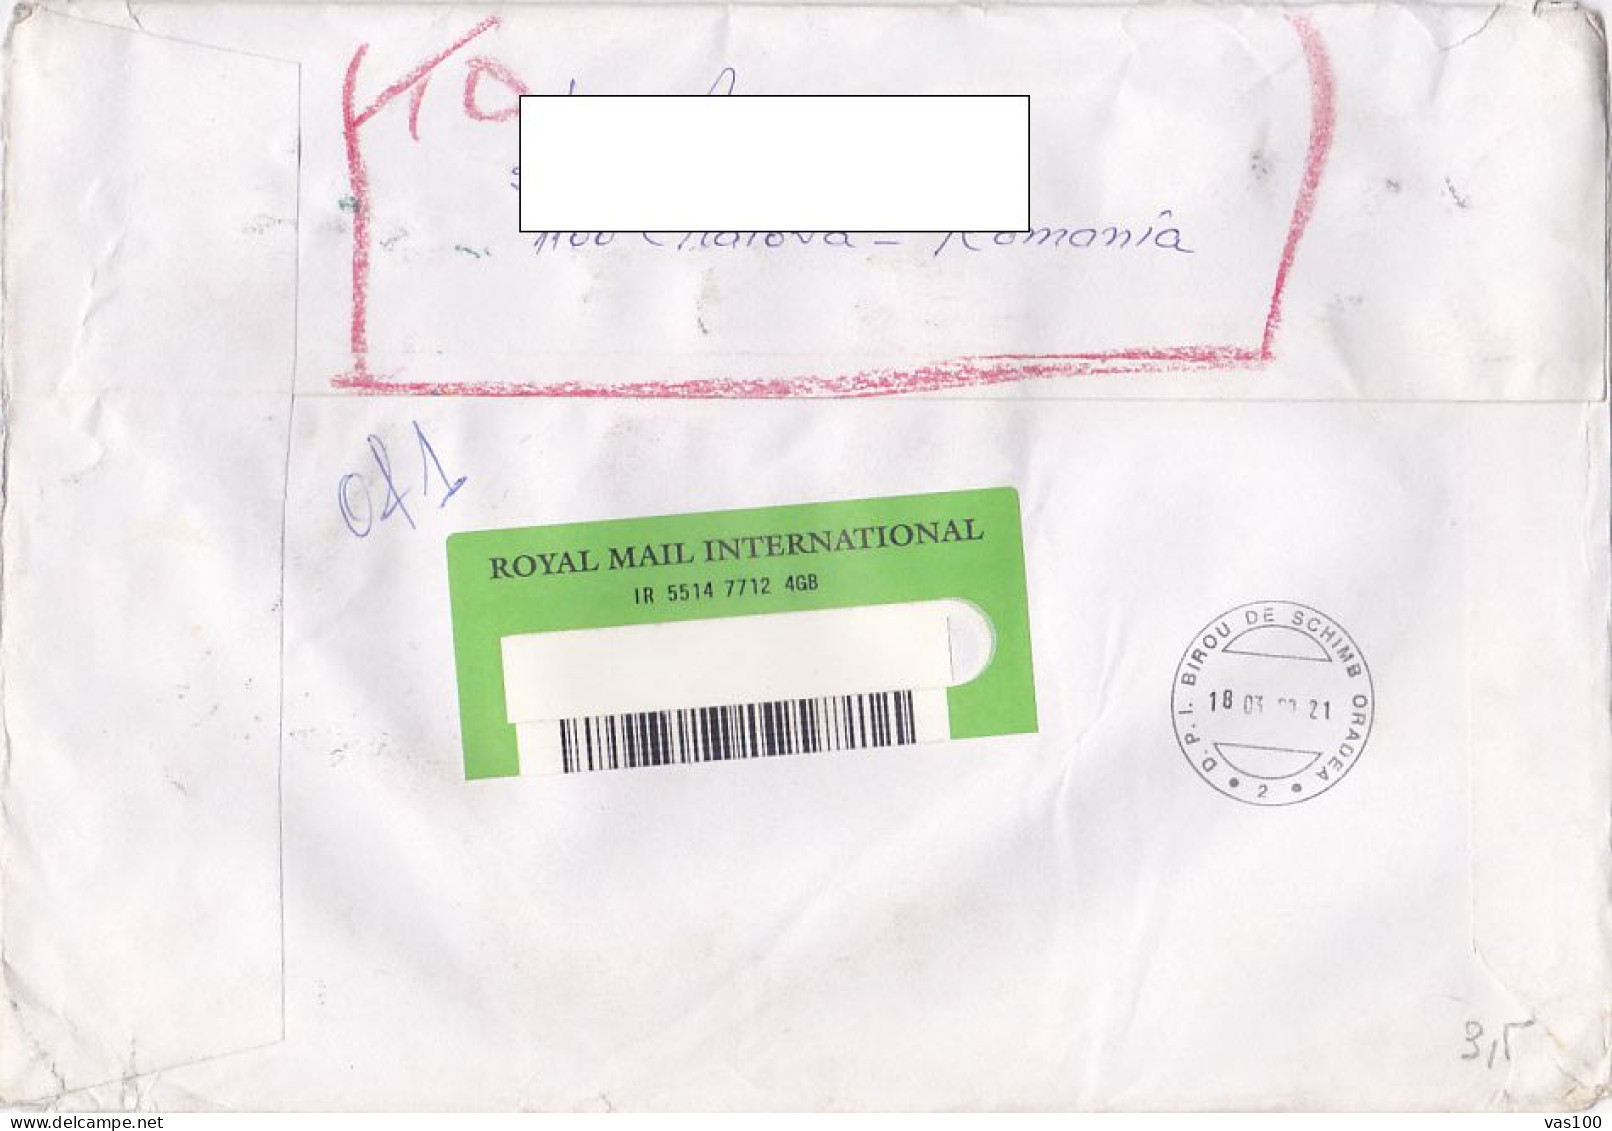 FLOWERS, CHURCH, STAMPS ON REGISTERED COVER, 1999, ROMANIA - Storia Postale